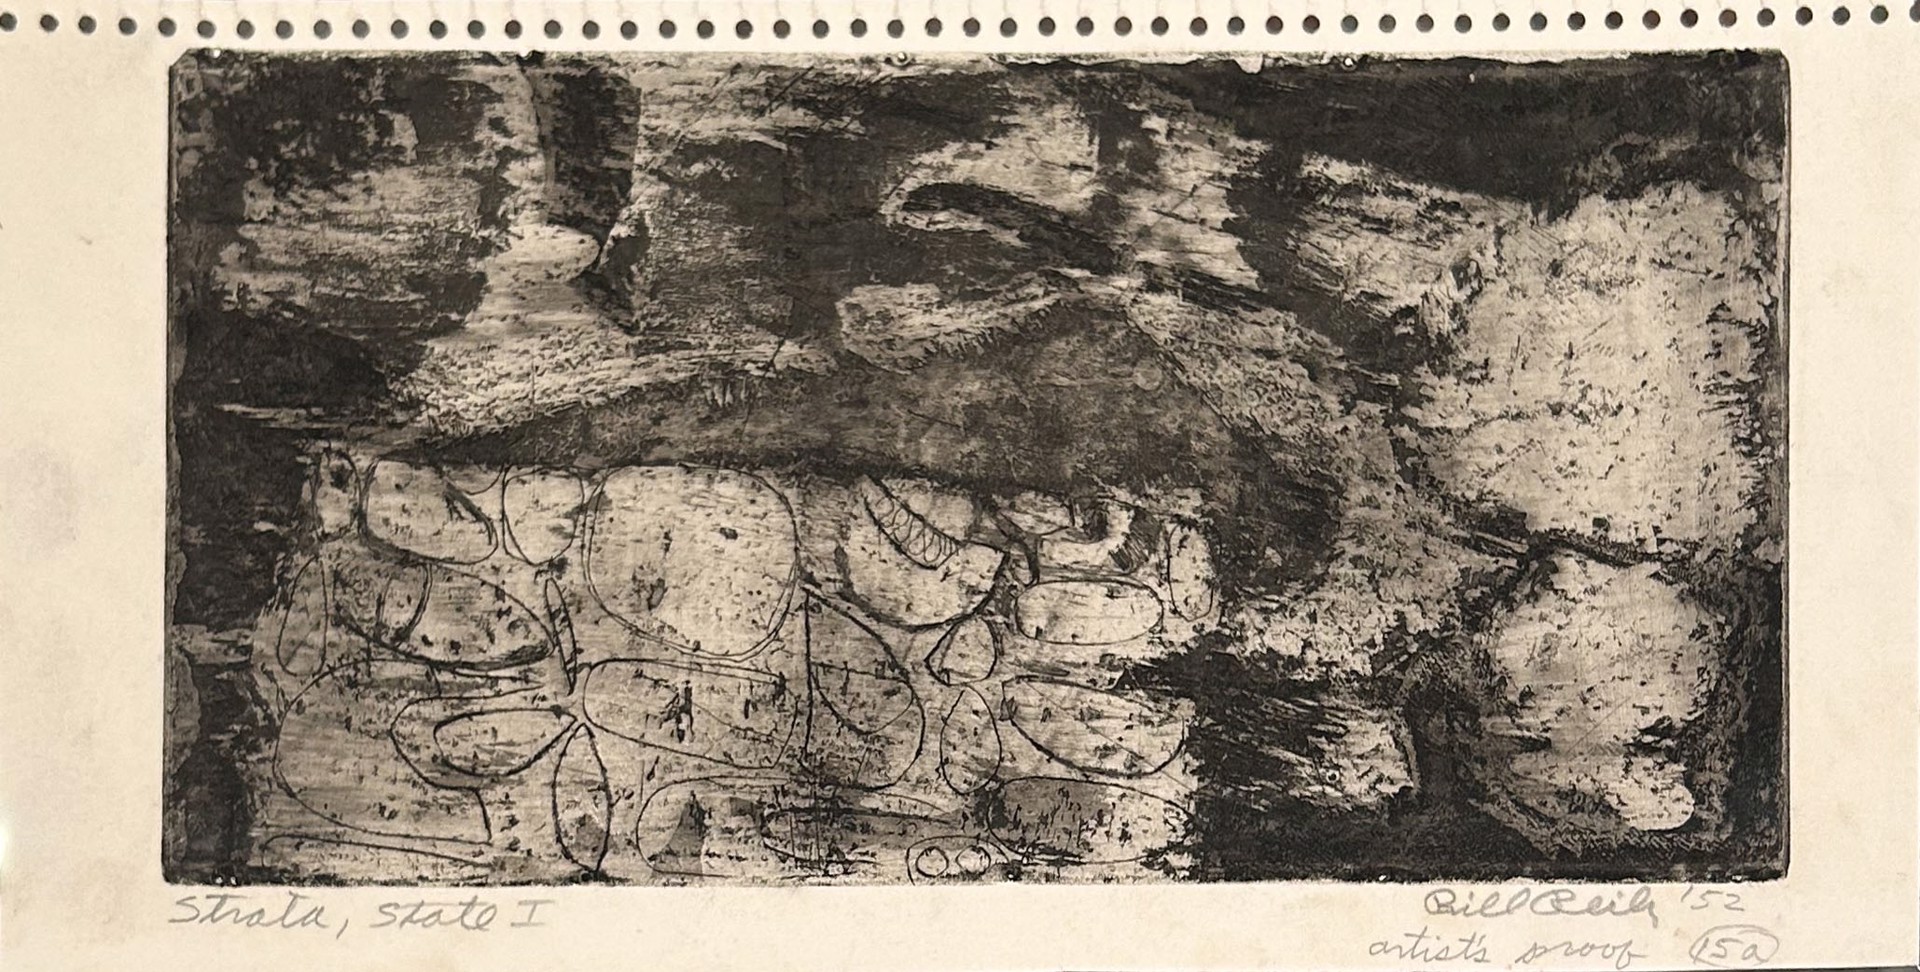 15a. Strata, State I (Artist's proof) by Bill Reily - Prints